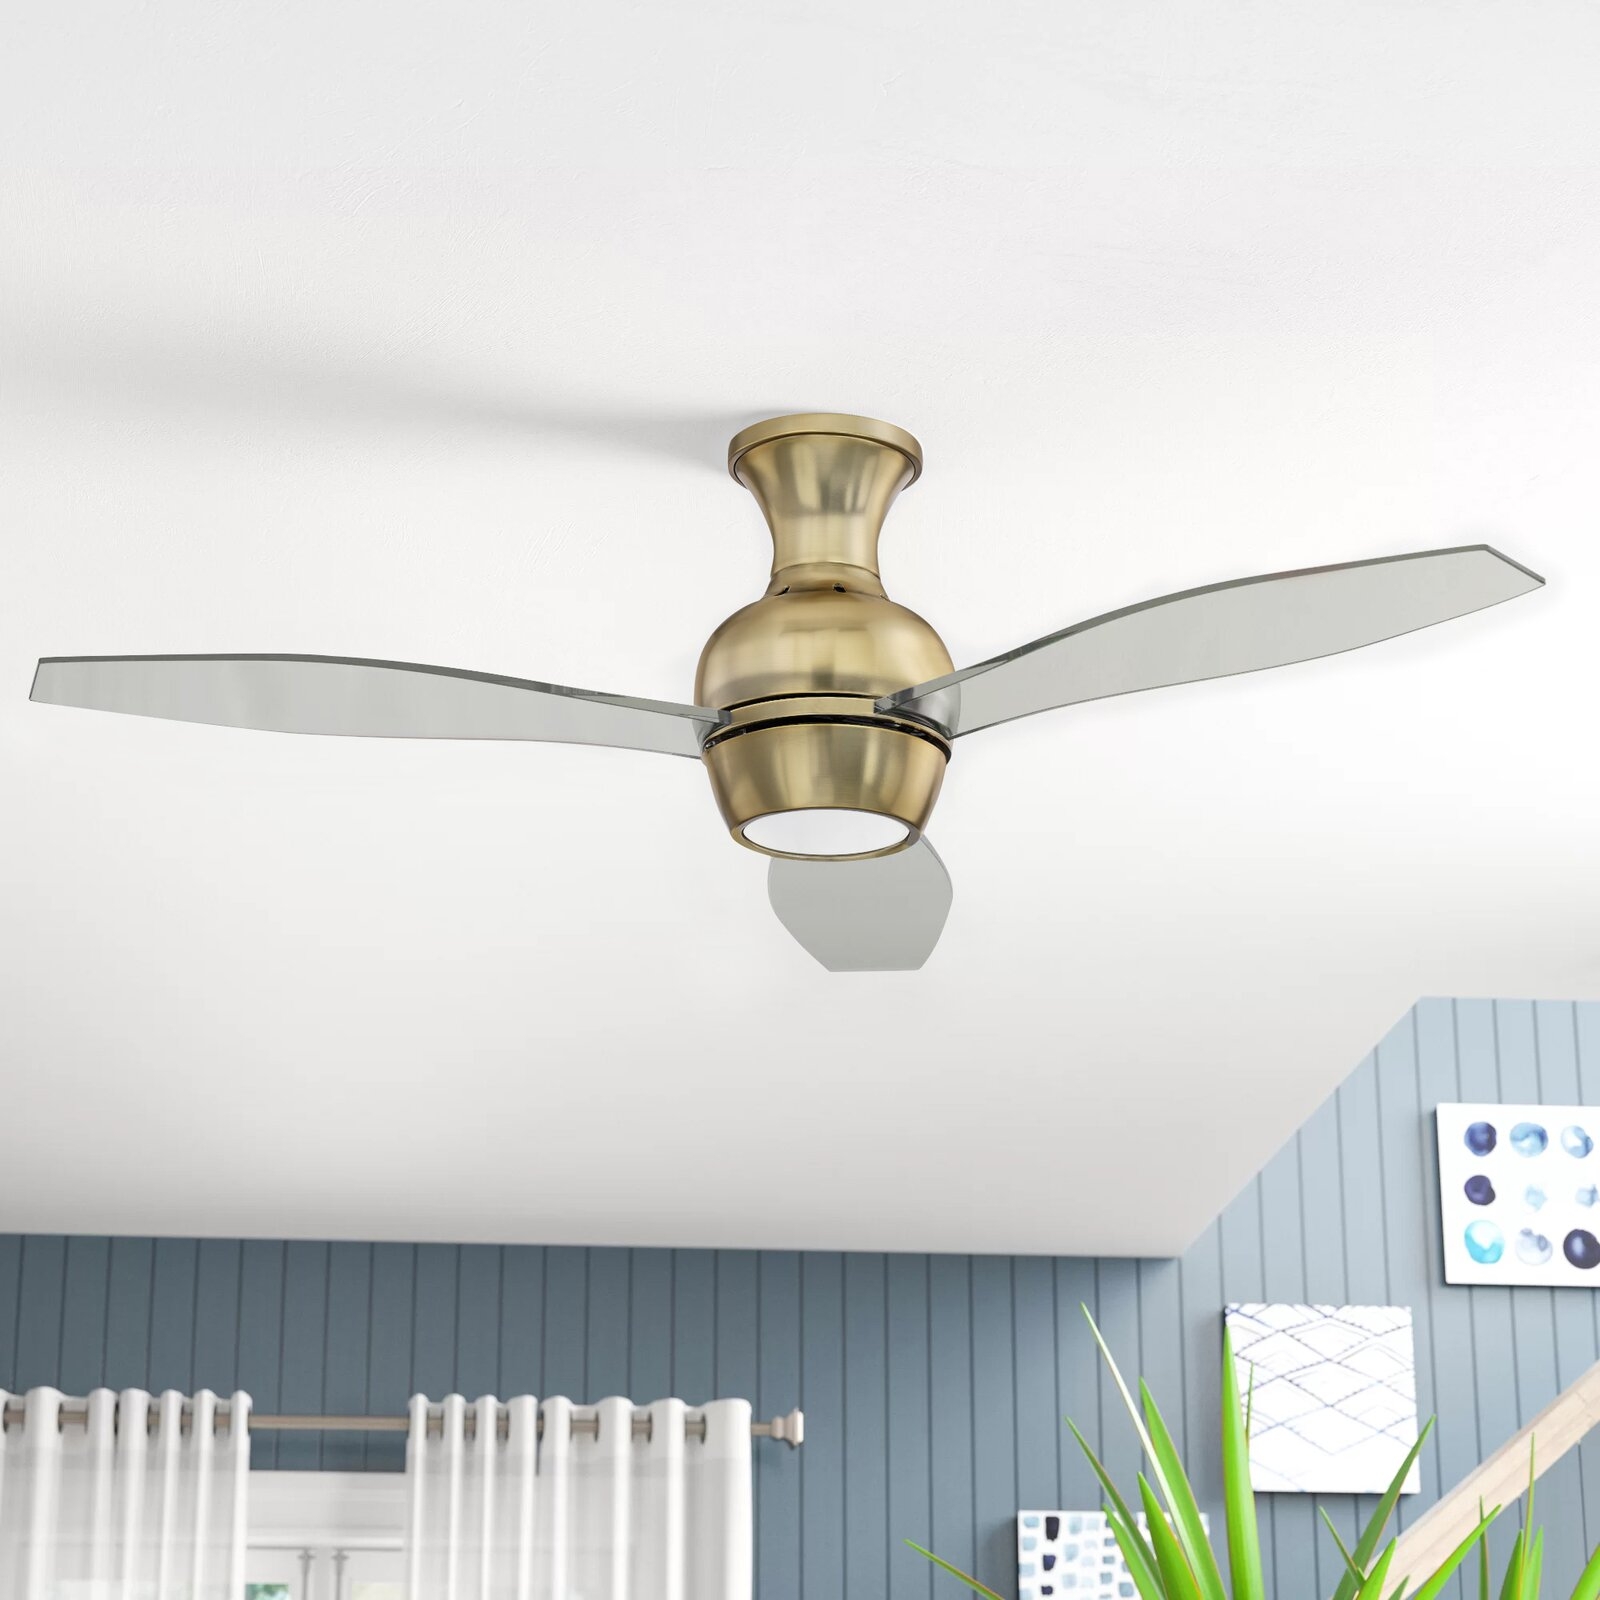 52" Mcnemar 3 - Blade LED Propeller Ceiling Fan with Wall Control and Light Kit Included - Image 0